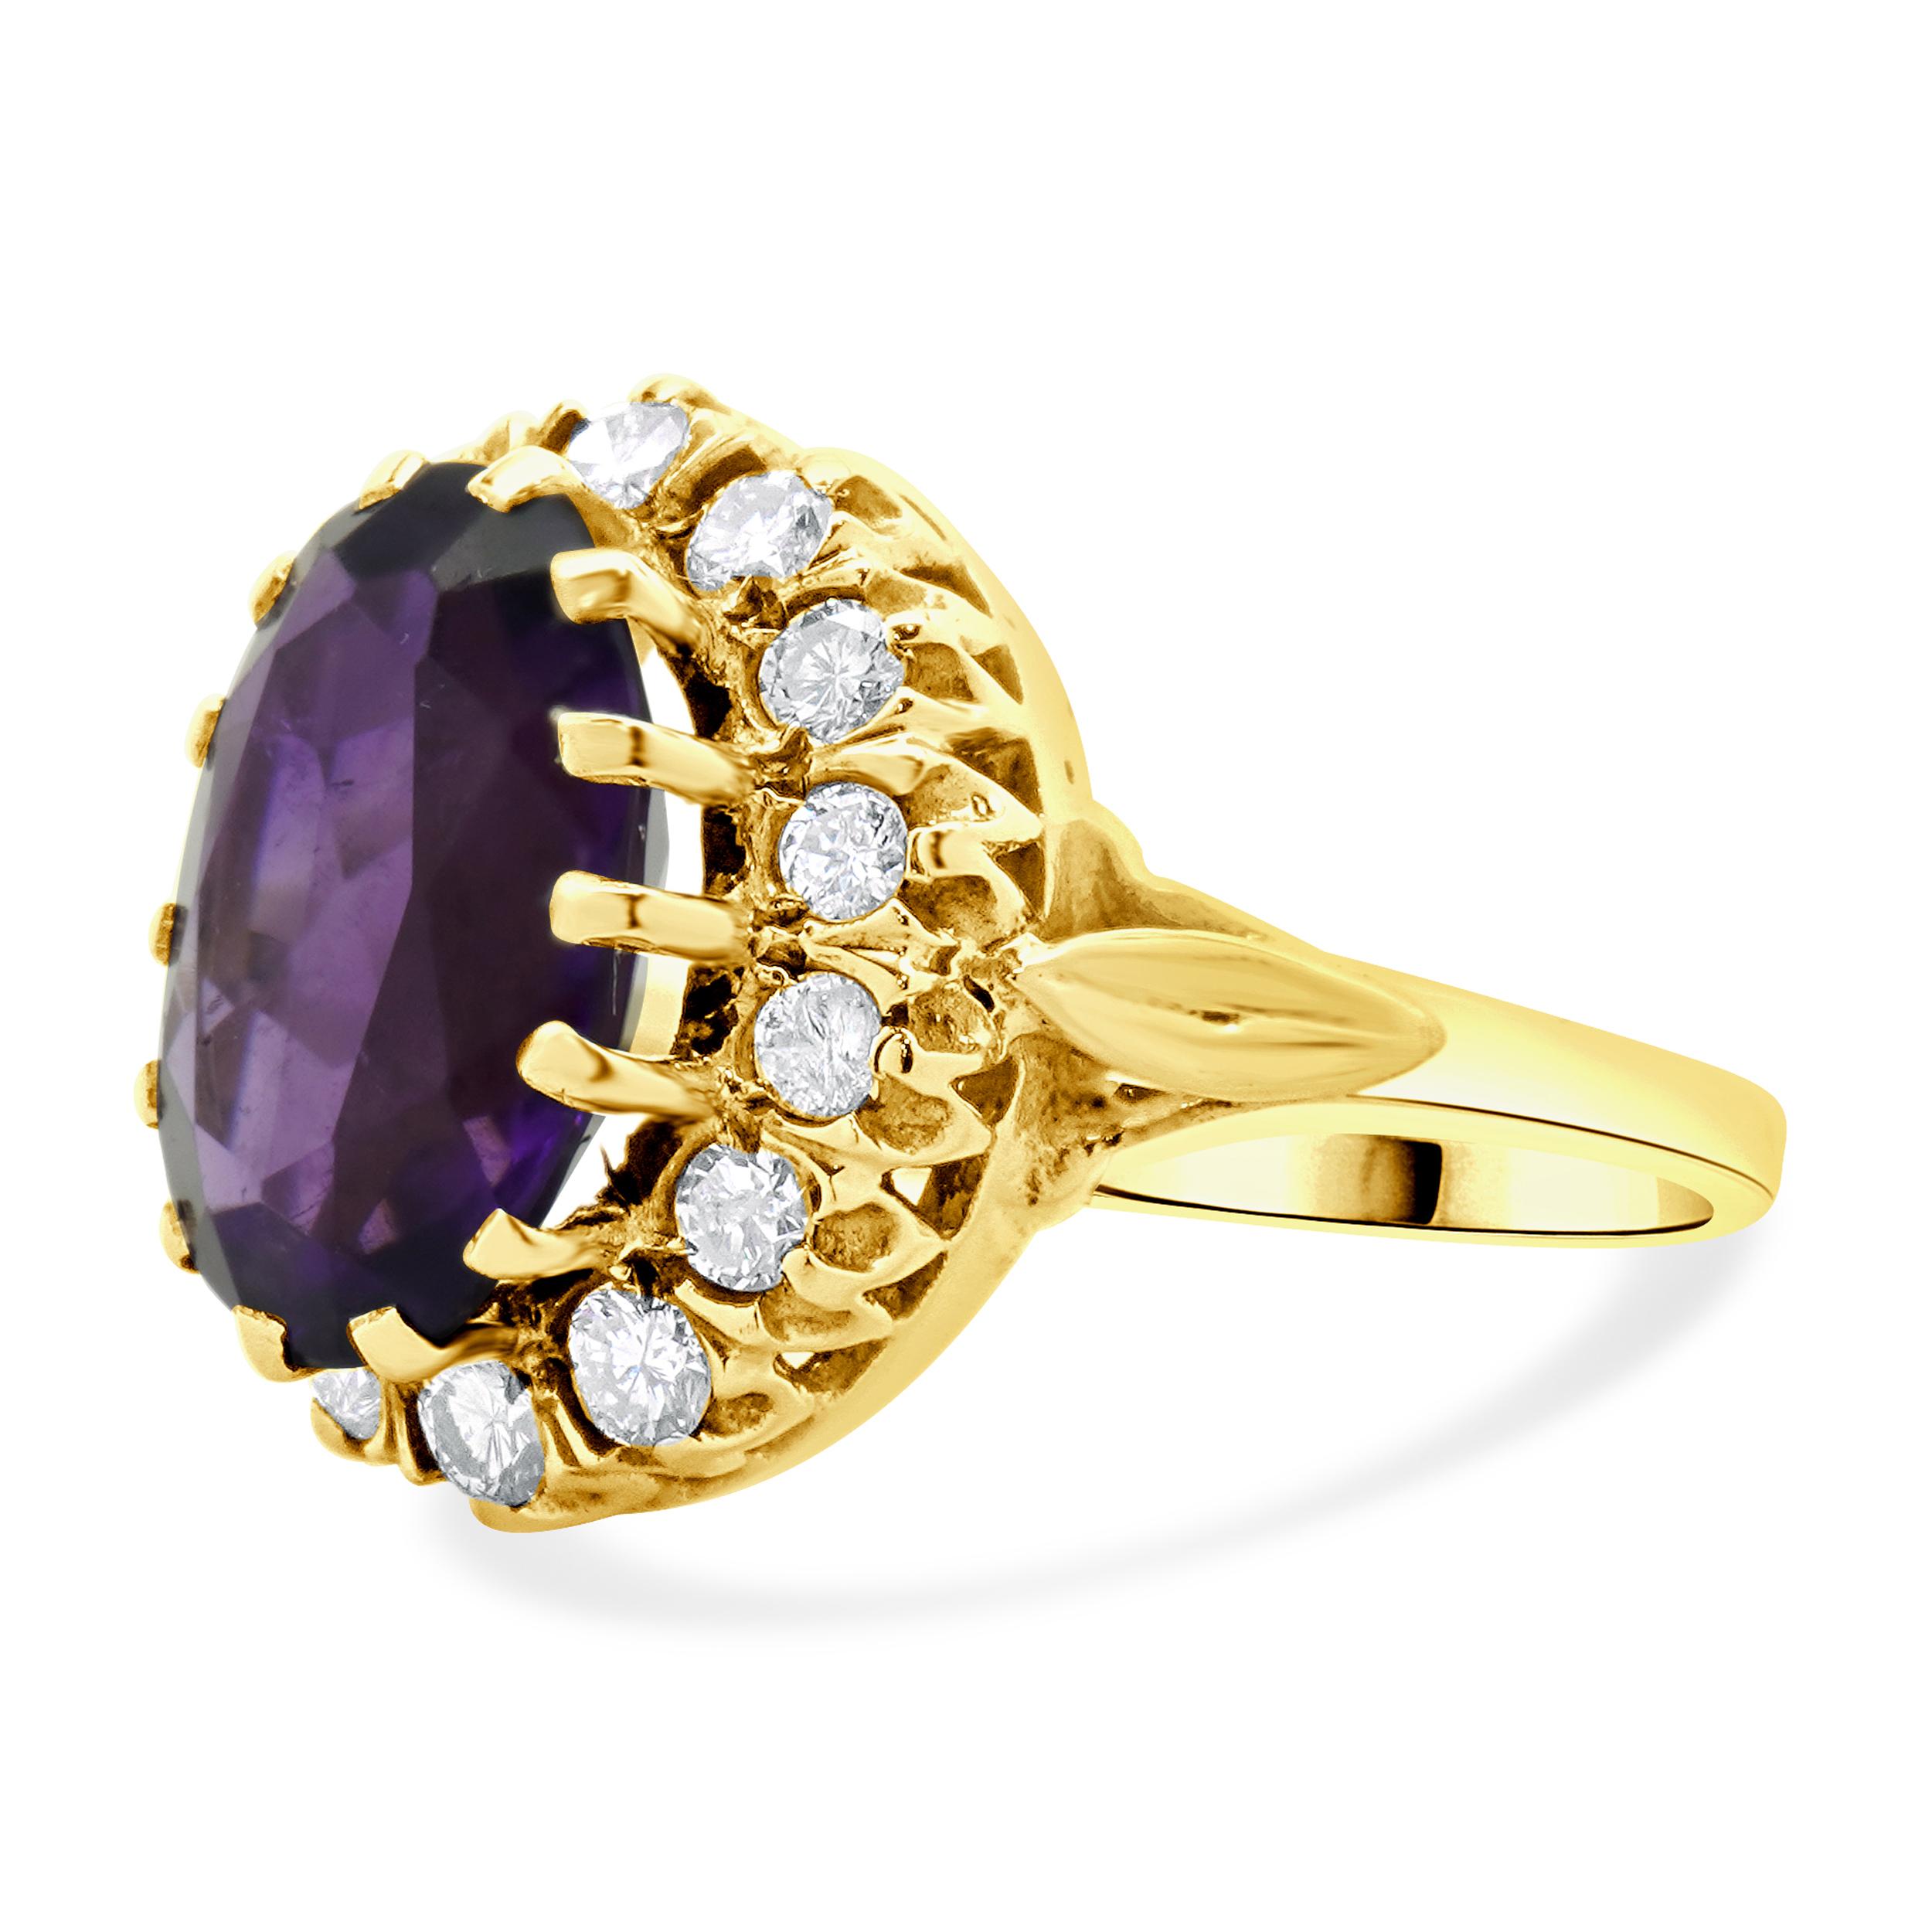 Material: 10K yellow gold
Diamond: 14 round brilliant cut = 0.70cttw
Color: J
Clarity: SI2-I1
Amethyst: 1 oval cut = 4.35ct
Ring Size: 8.5 (please allow up to 2 additional business days for sizing requests)
Dimensions: ring top measures